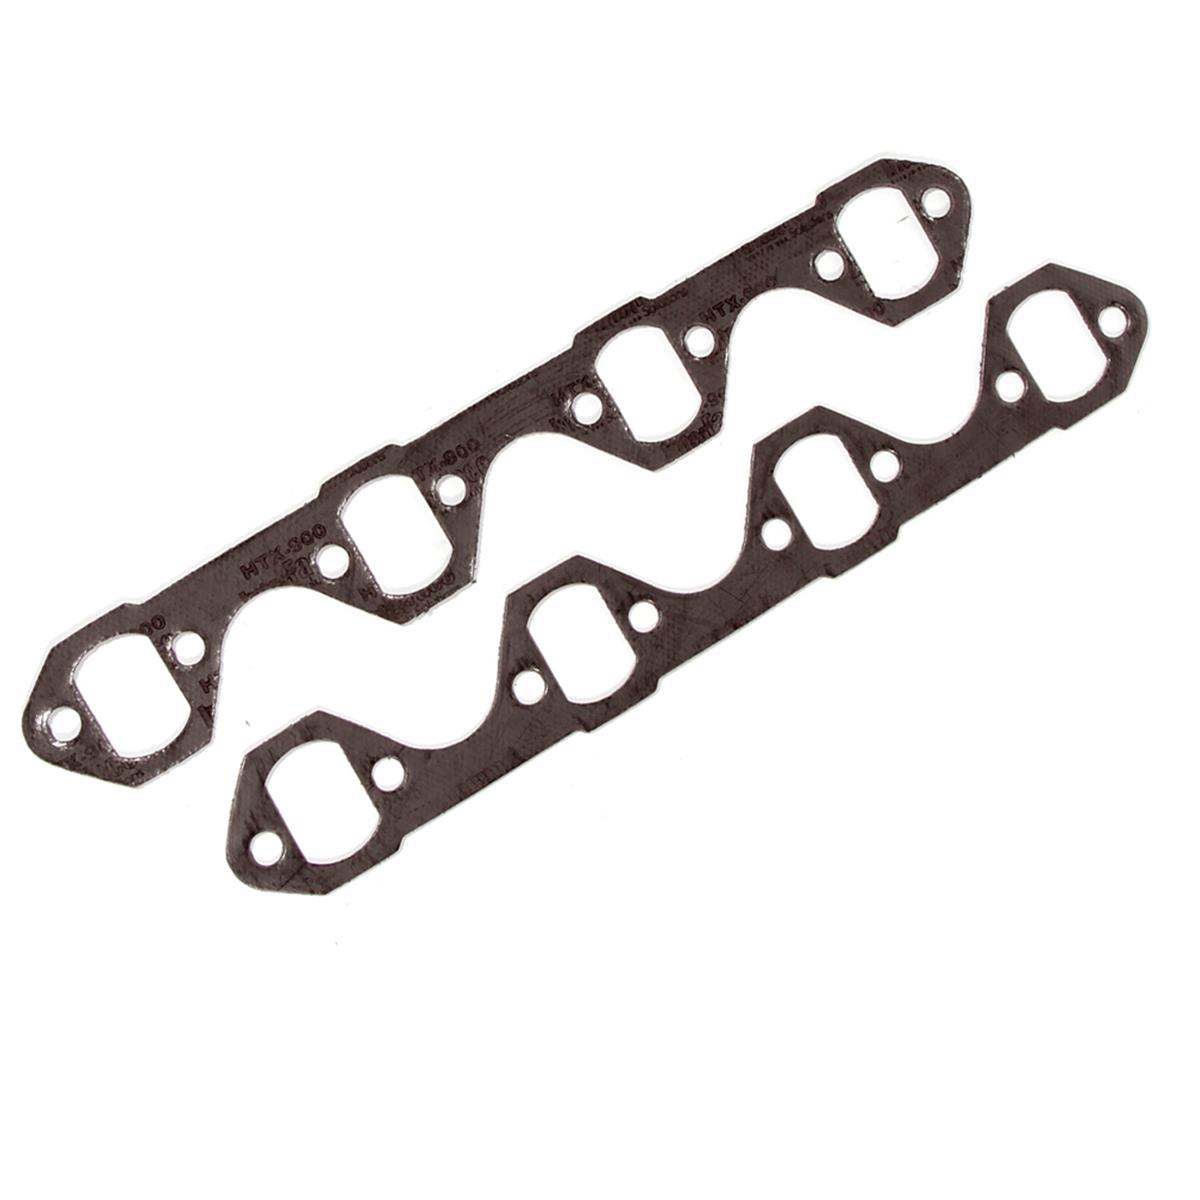 Mr. Gasket 5928 Ultra-Seal Header Gaskets Ford 302 Oval エンジン関連パーツ 